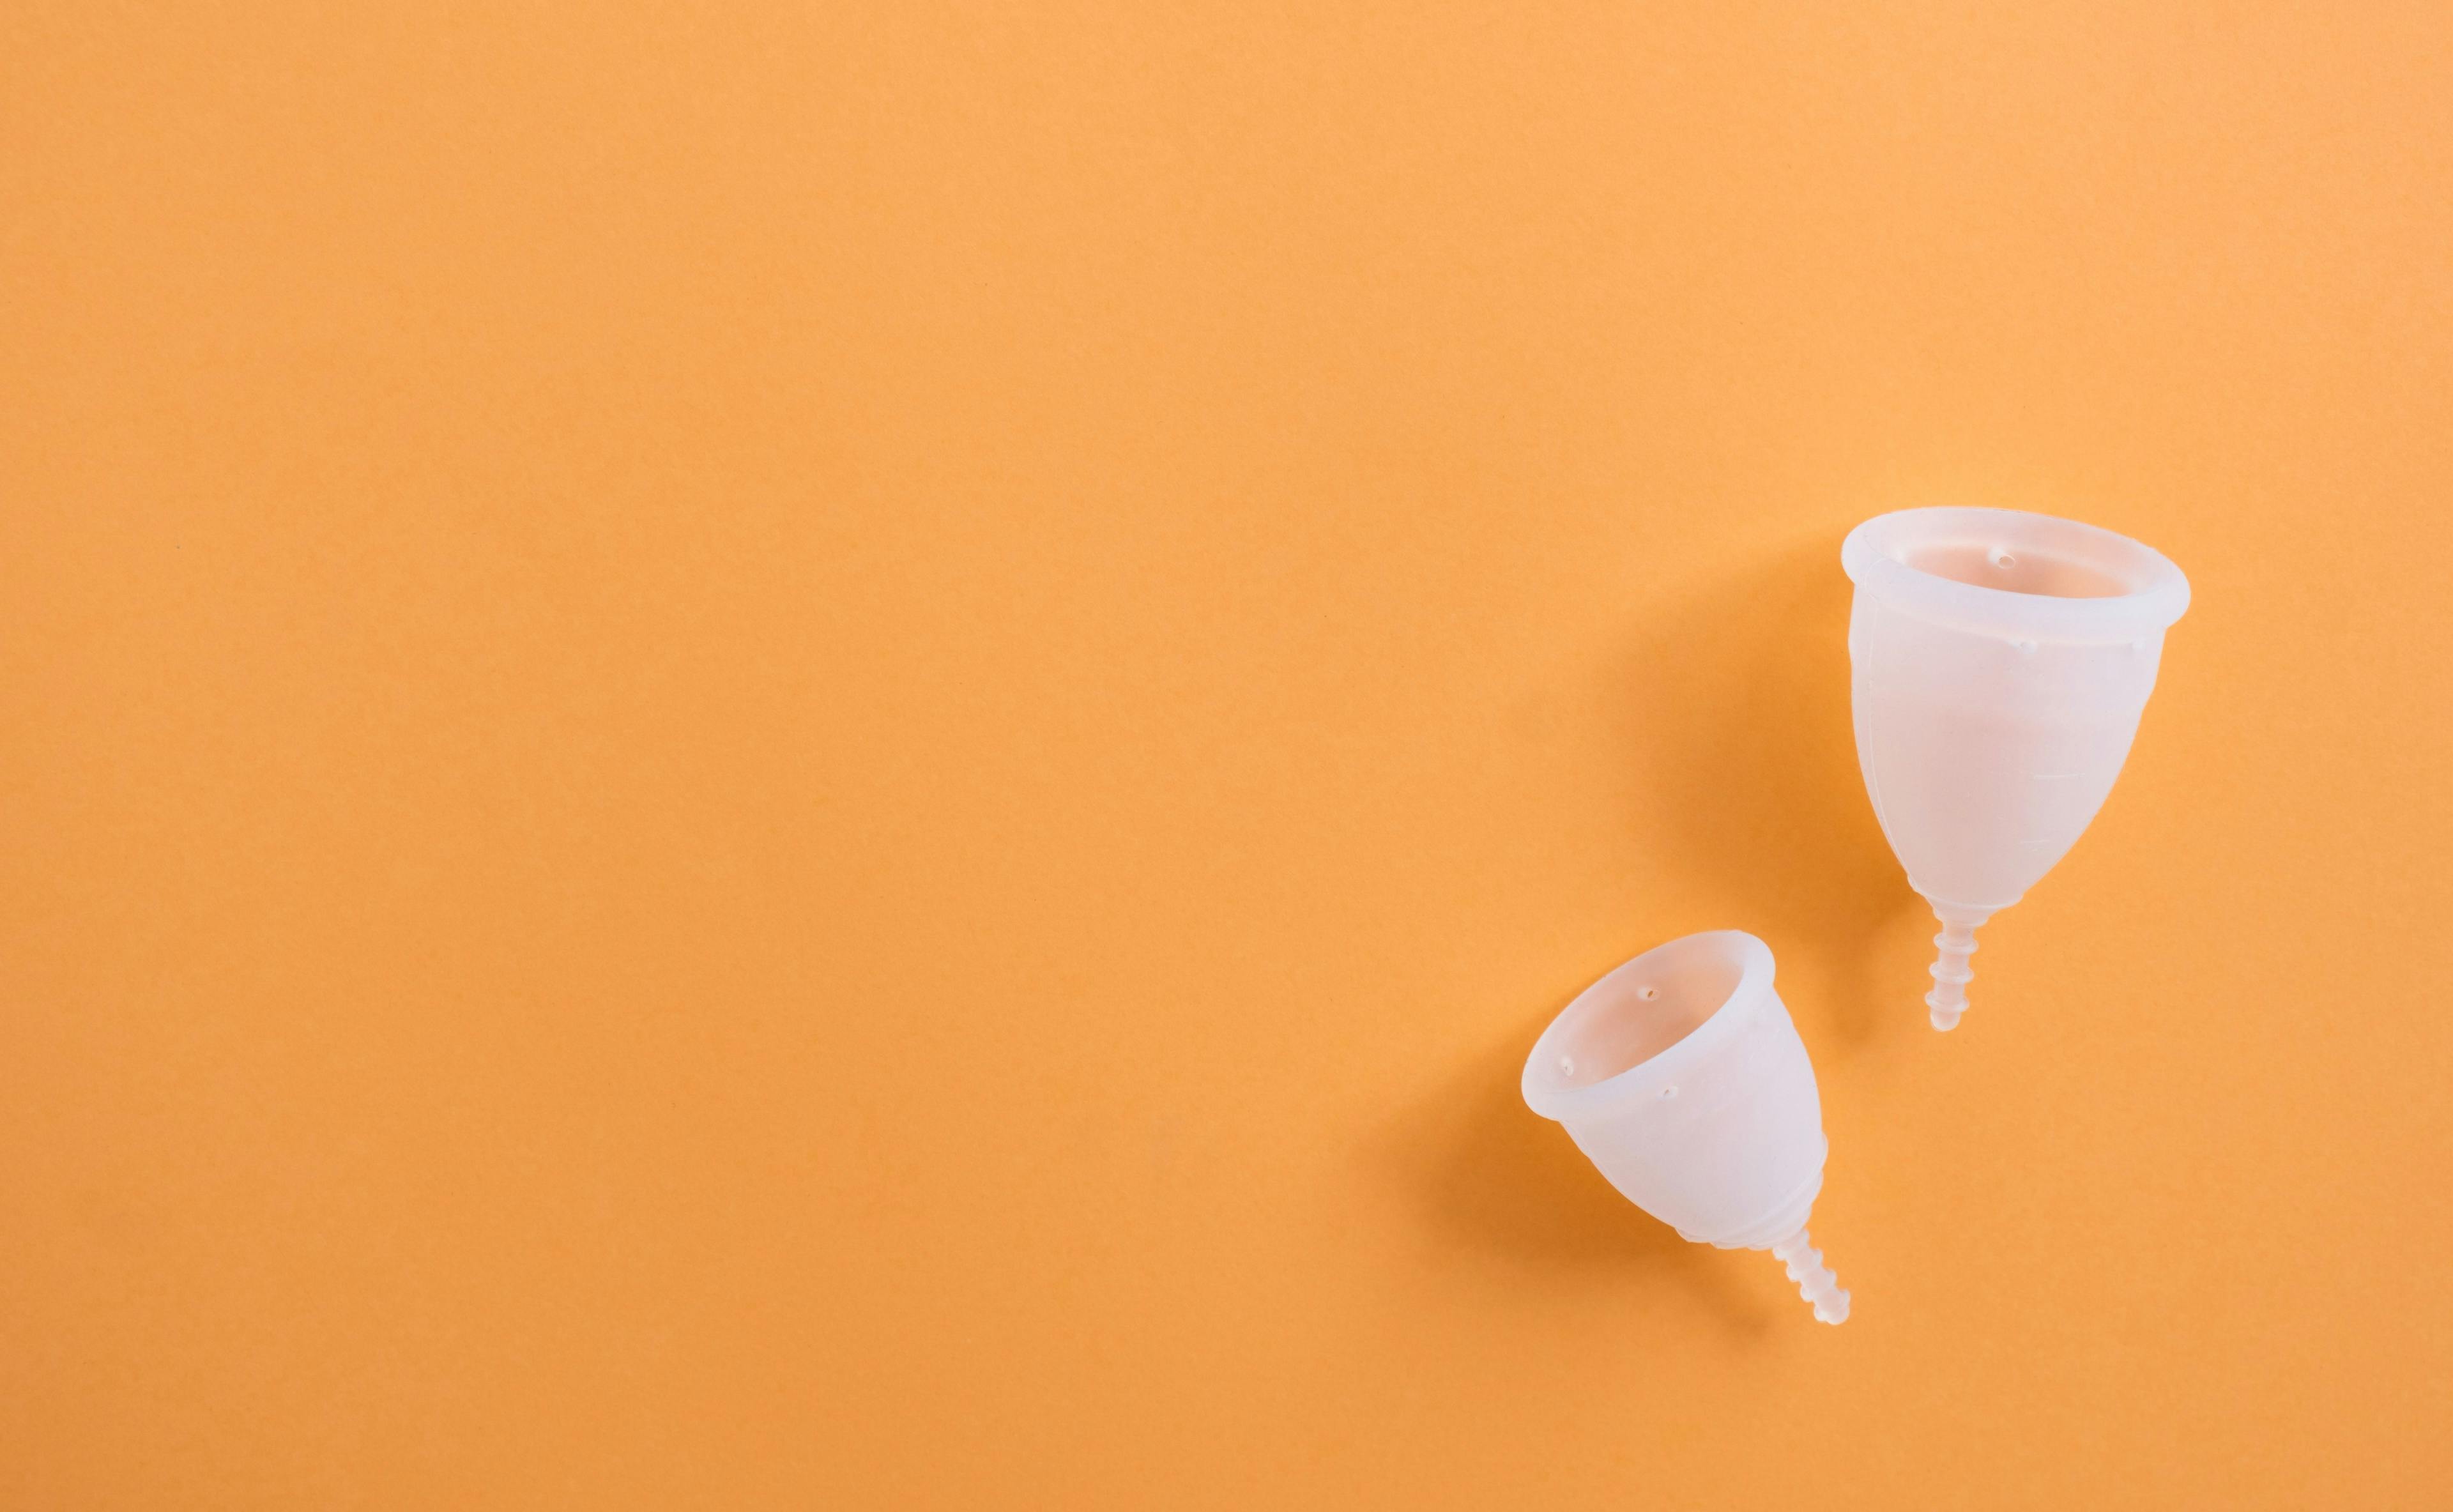 Use of Menstrual Cups May Lower Risk of Herpes Simplex Virus Type 2 Infection, Study Finds